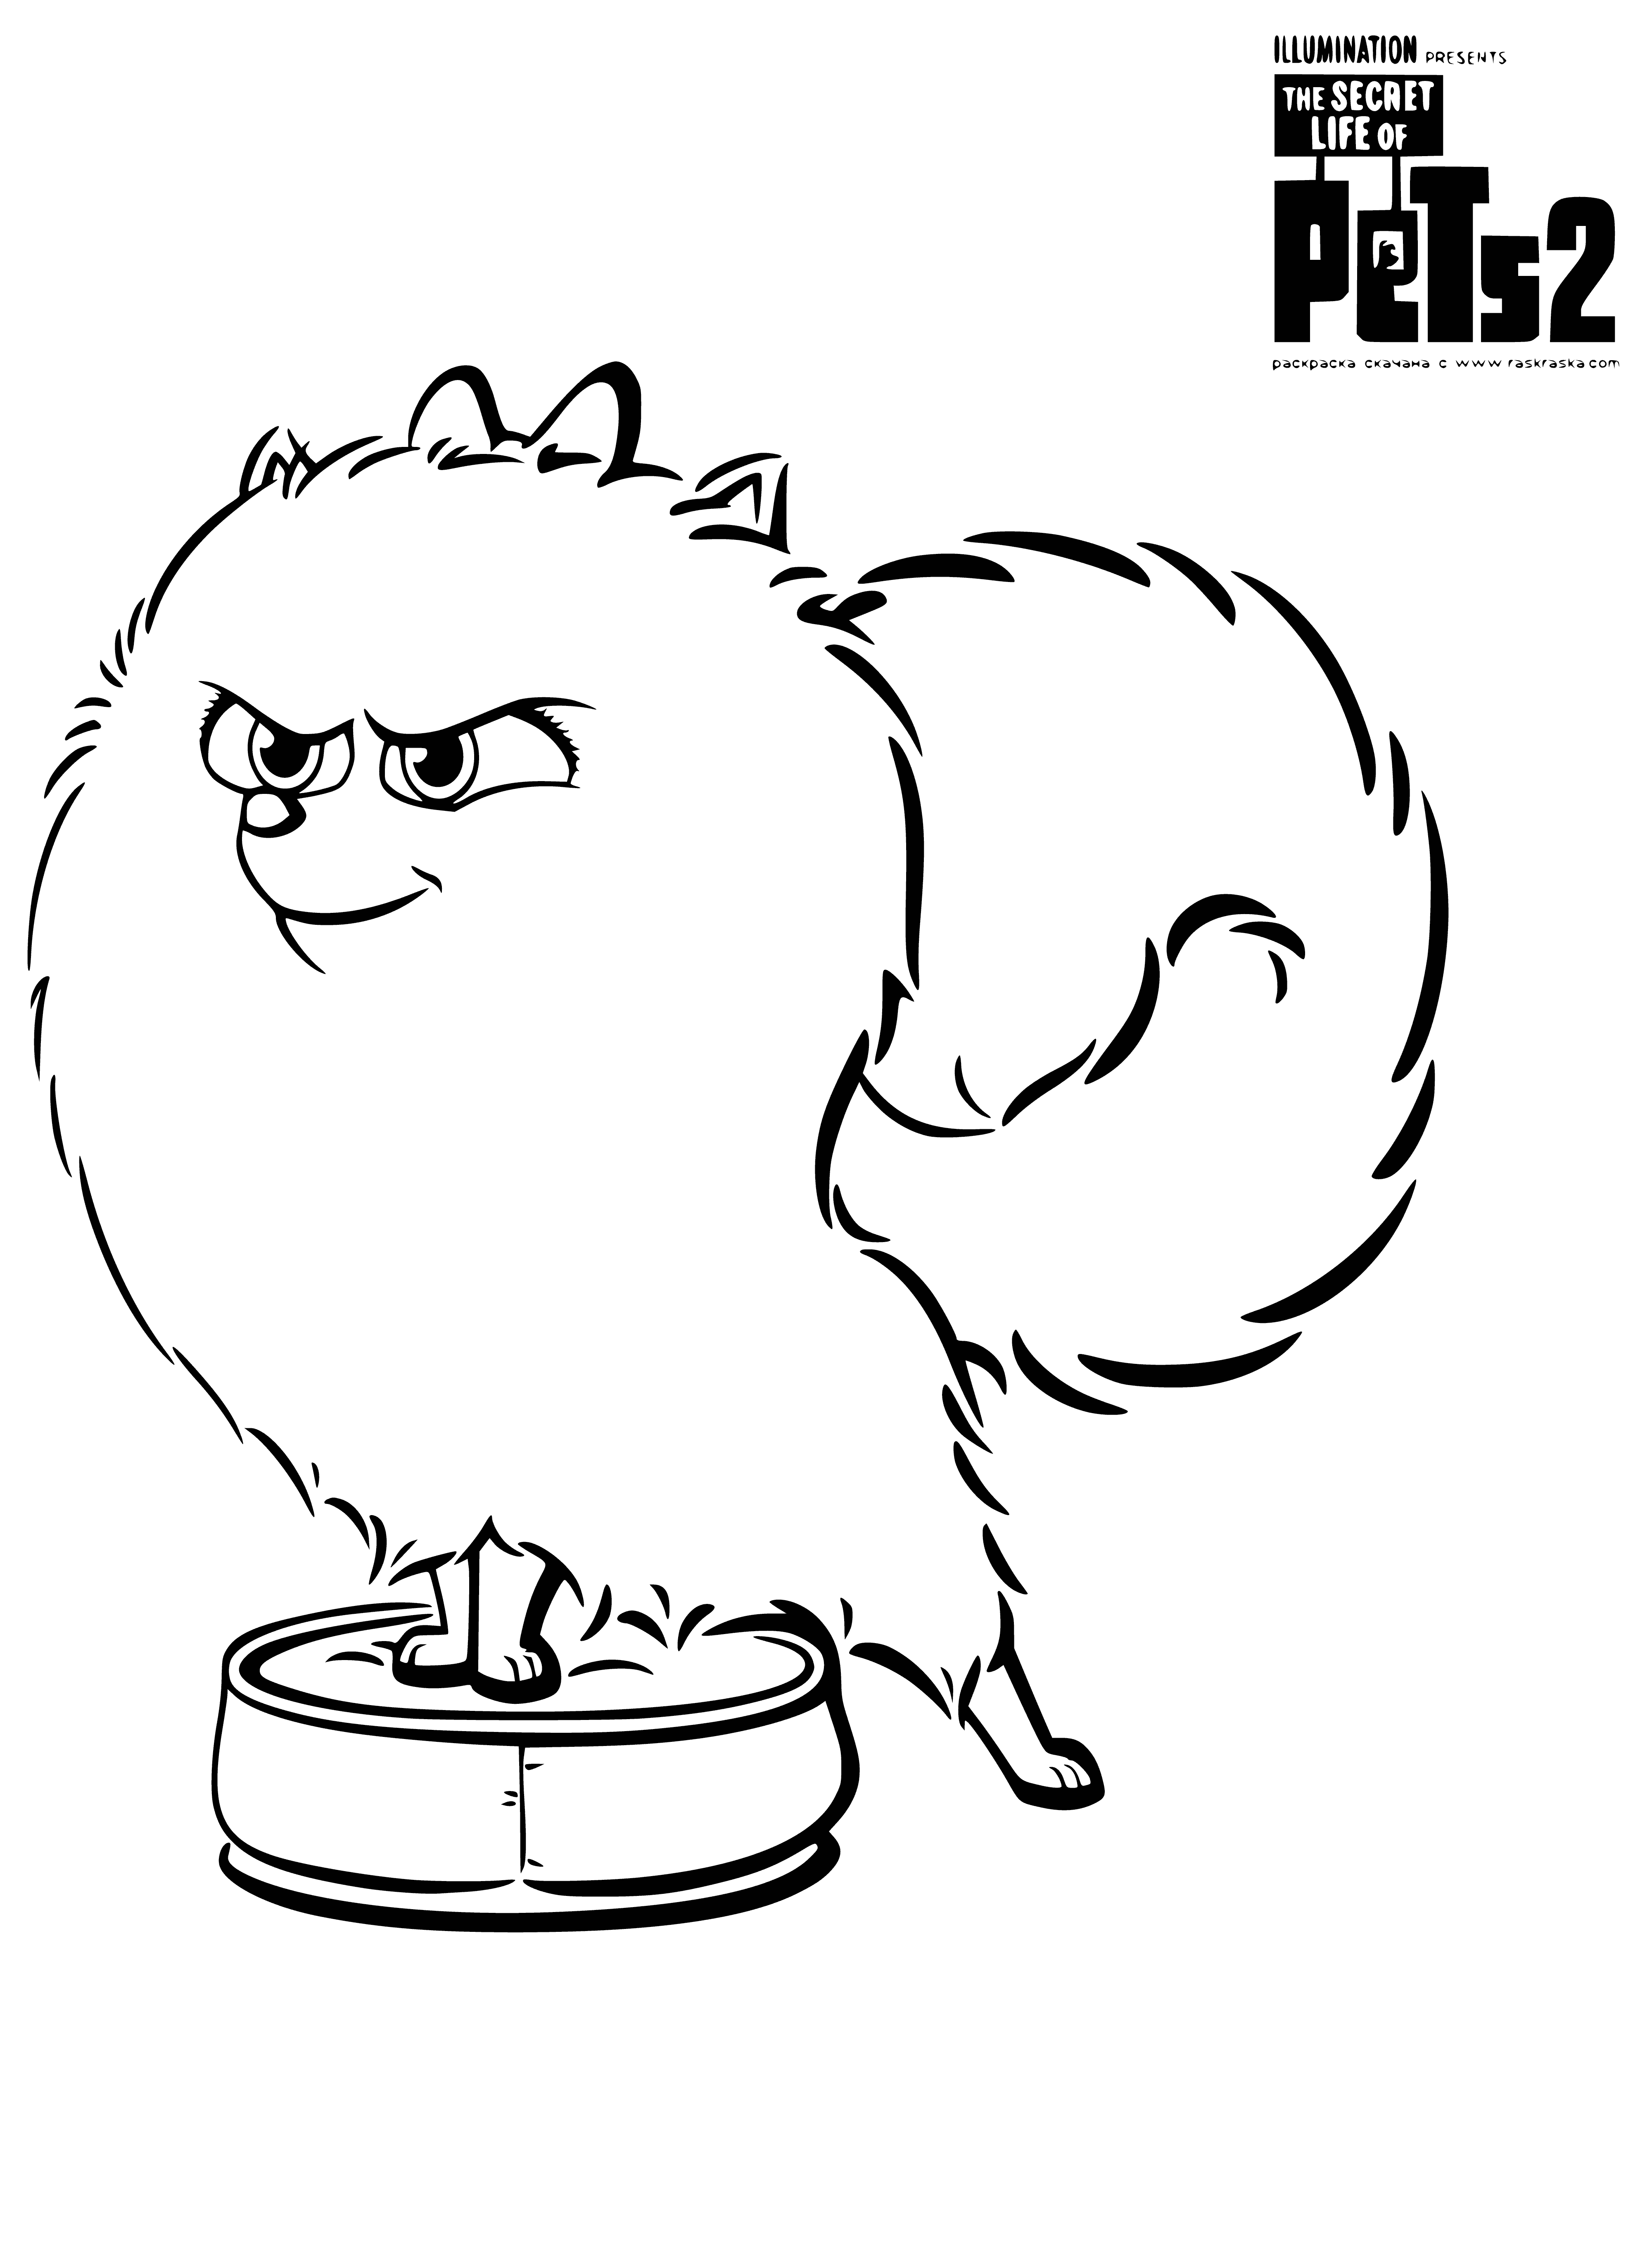 Spitz Gidget coloring page